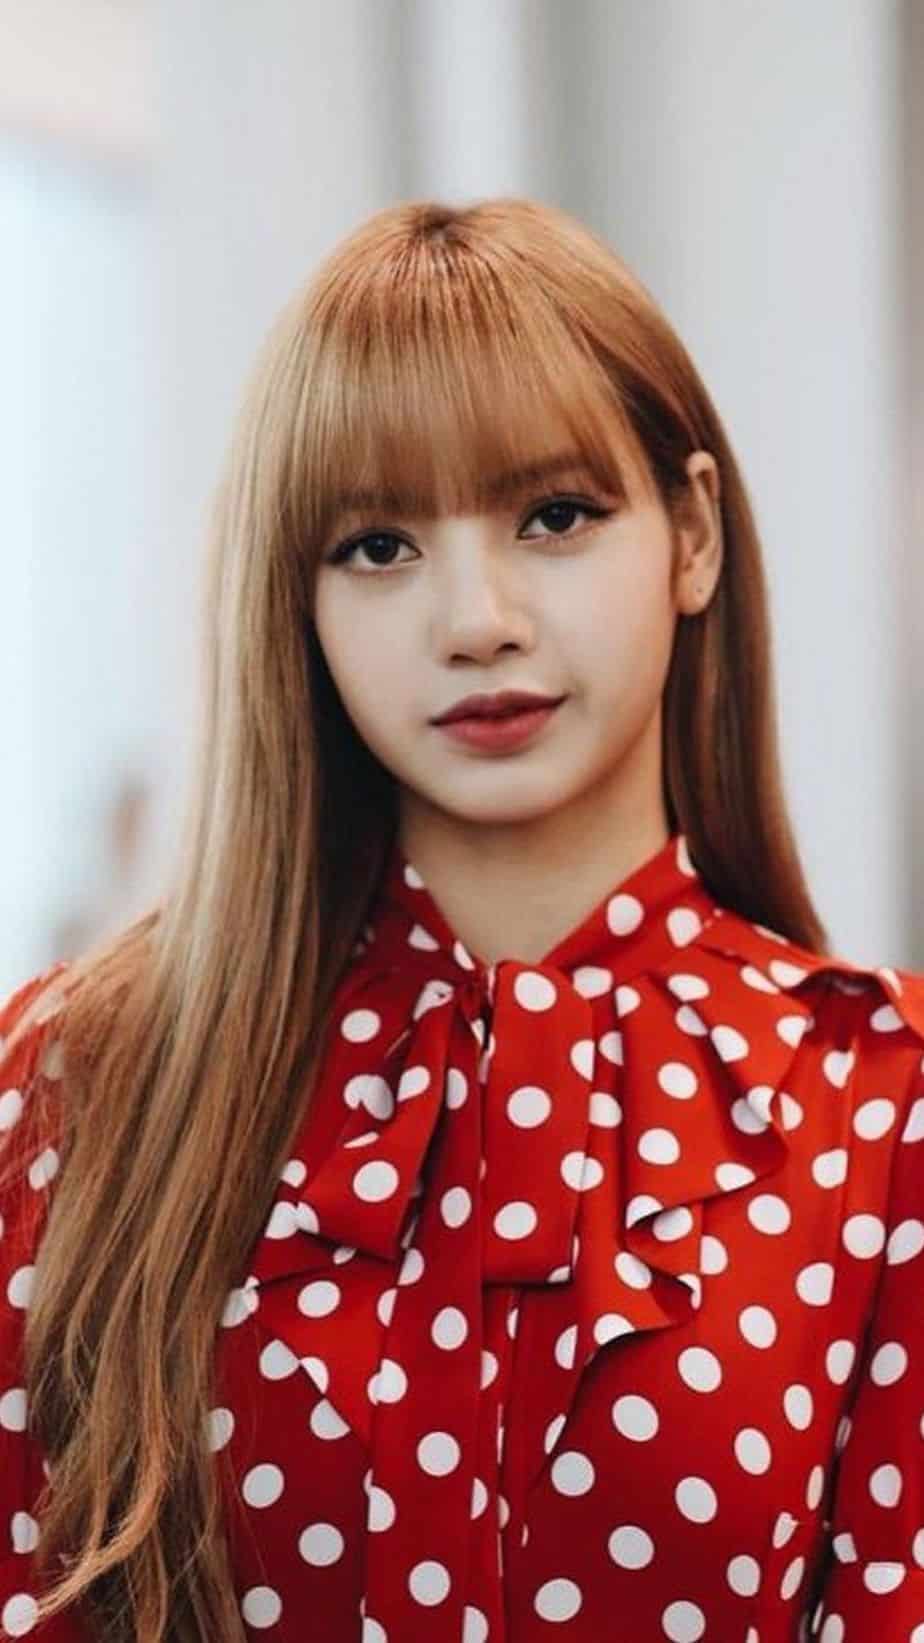 Lisa in a red and white dress